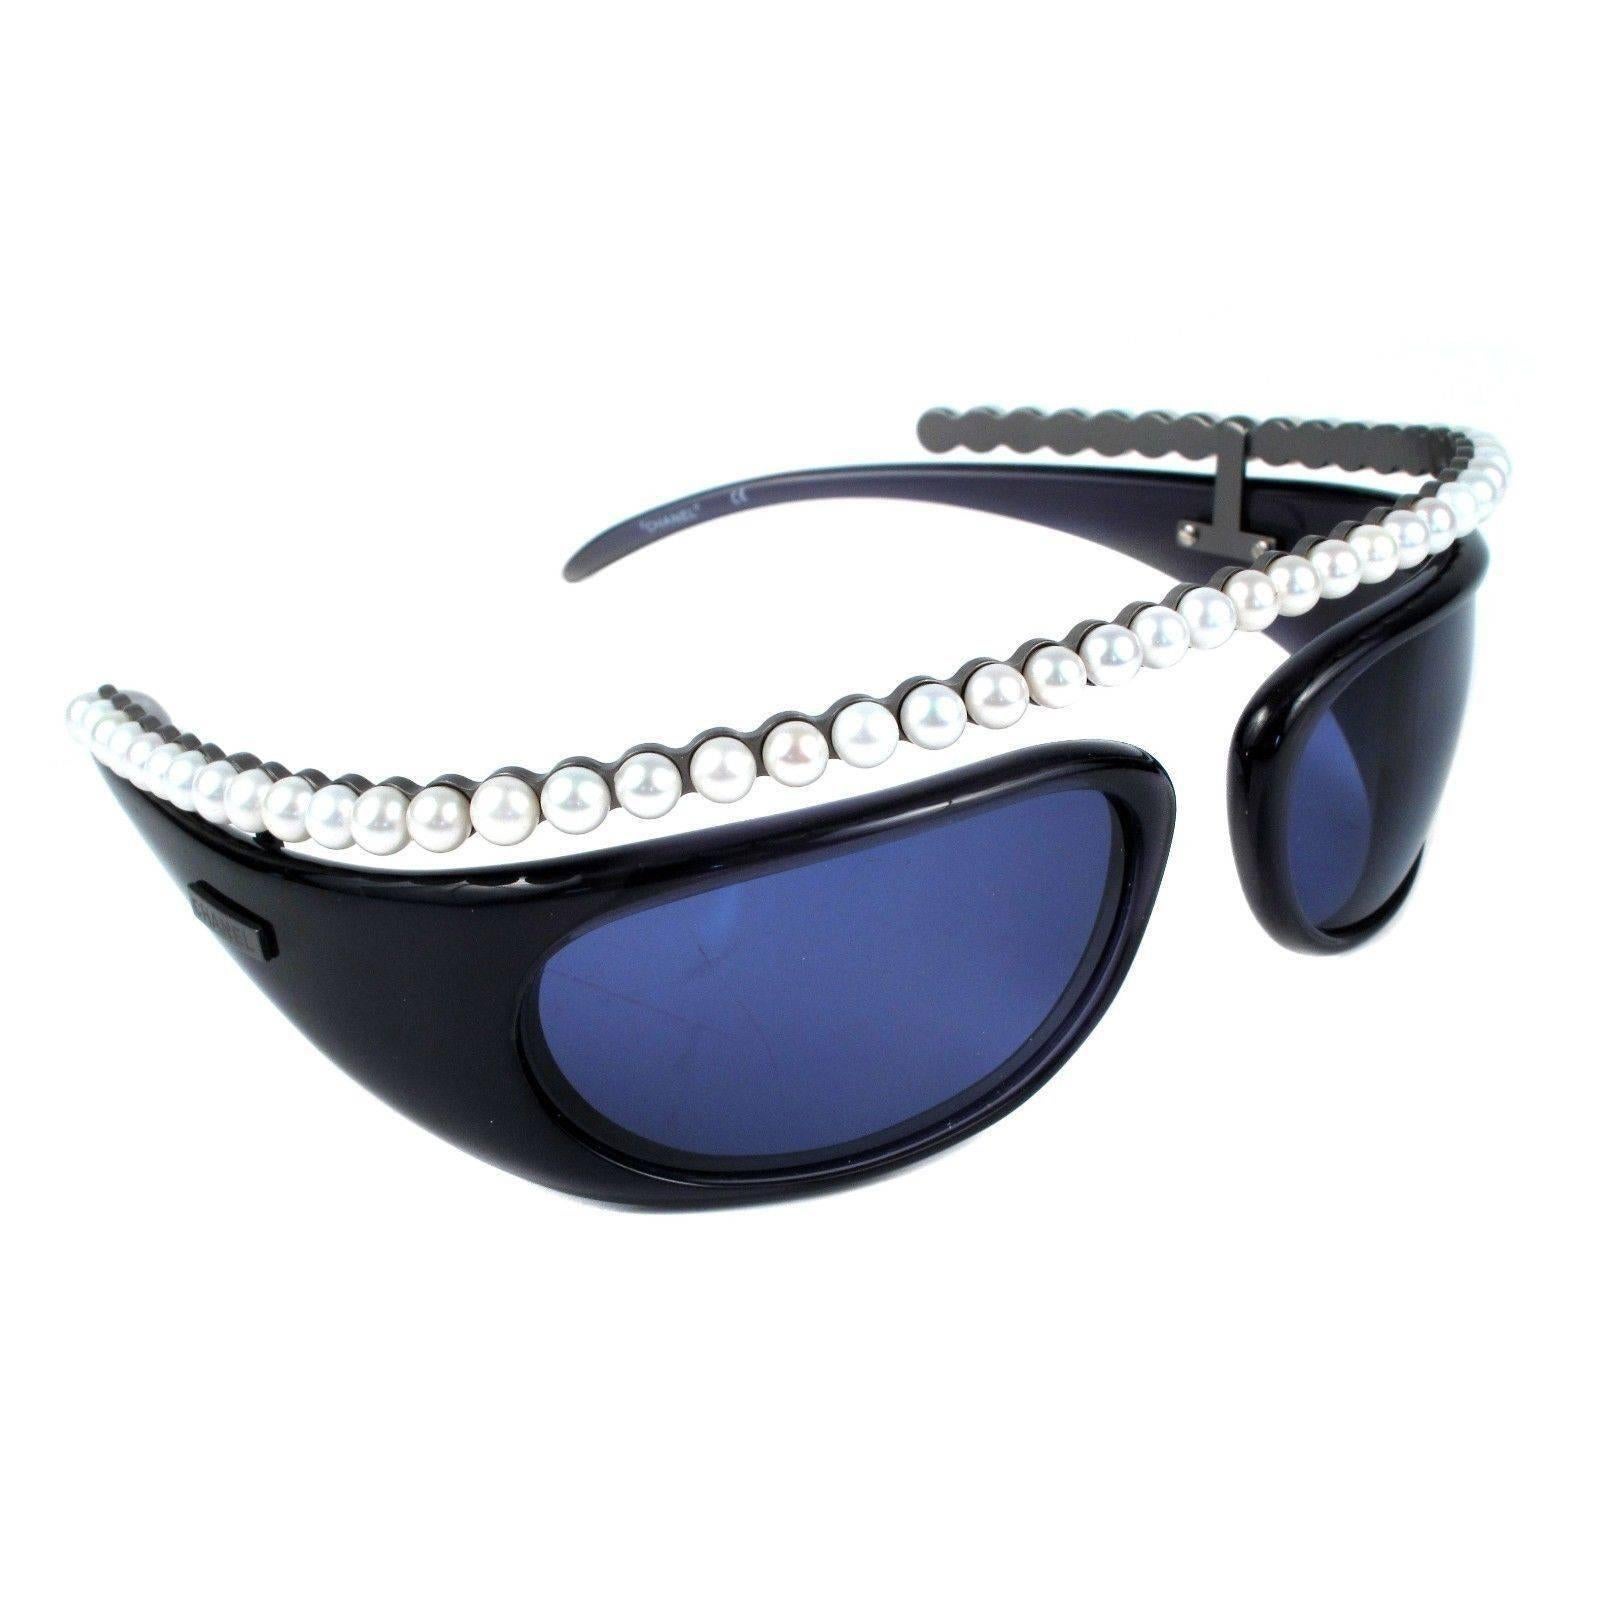 Chanel - Cutout Sunglasses

Color: Black / Blue / White

------------------------------------------------------------

Details:

- faux pearls along top of frames

- chanel logo at arms

- includes dust bag & box

- item #